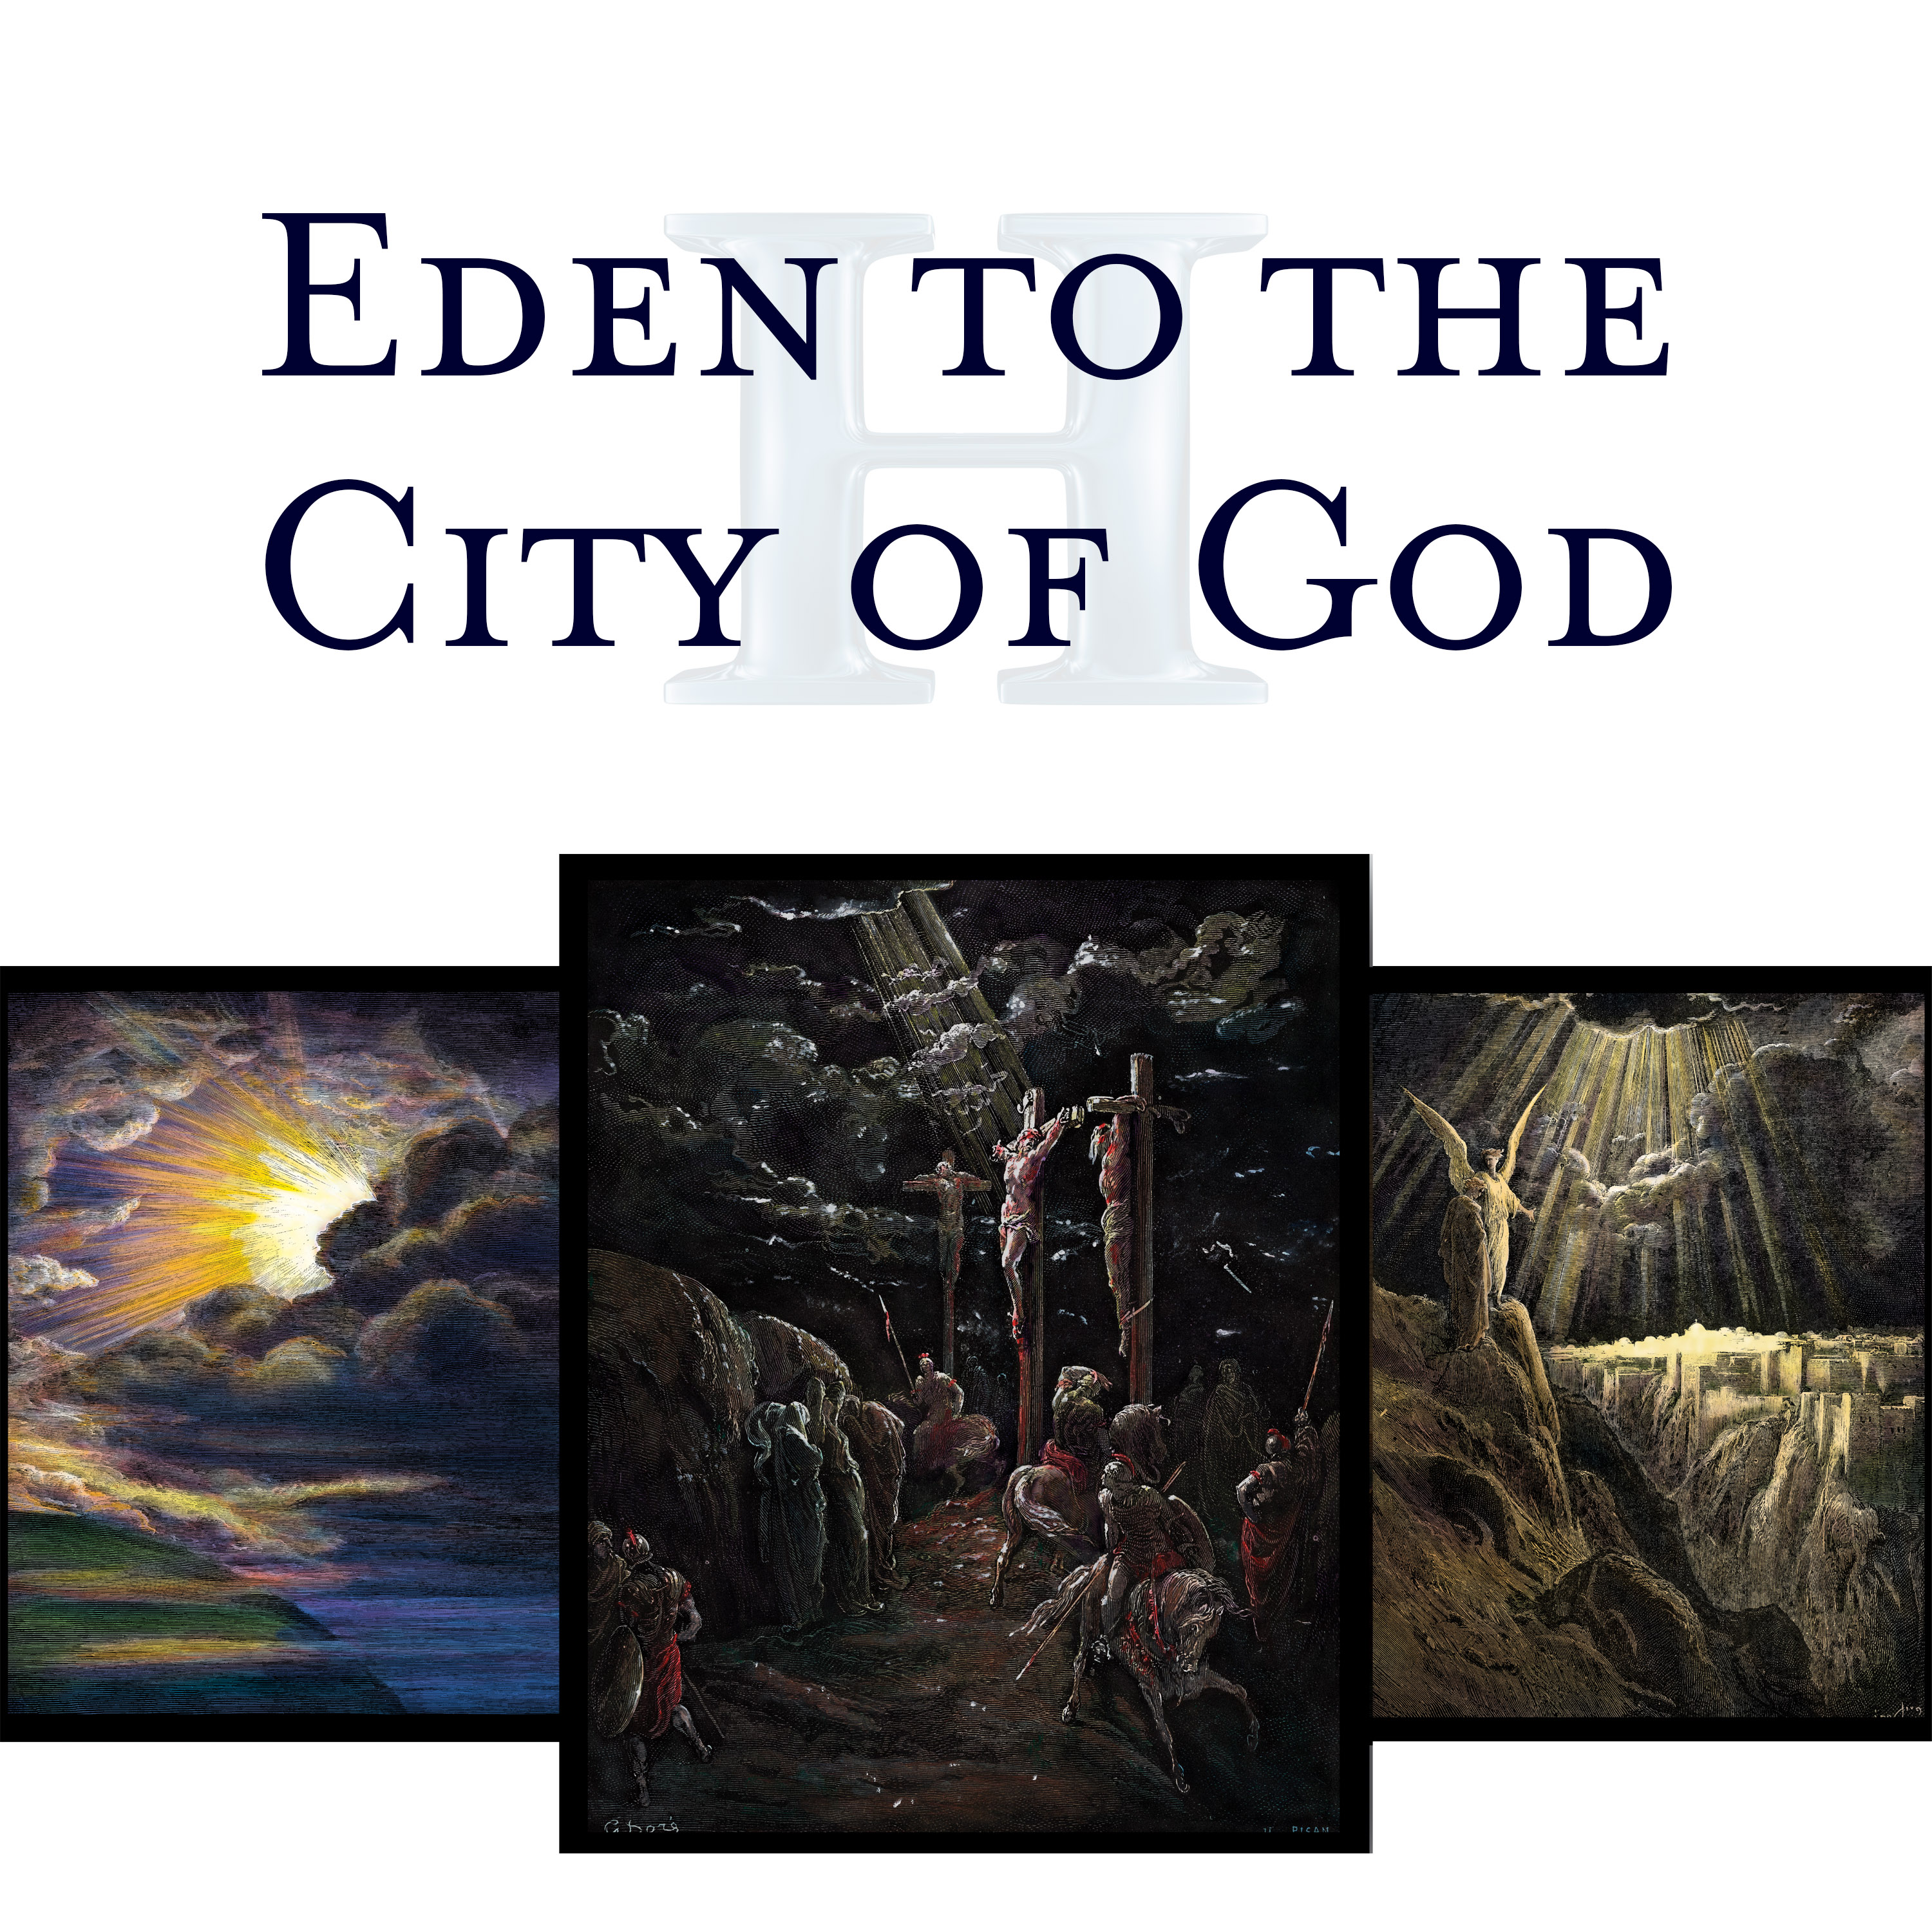 Eden to the City of God